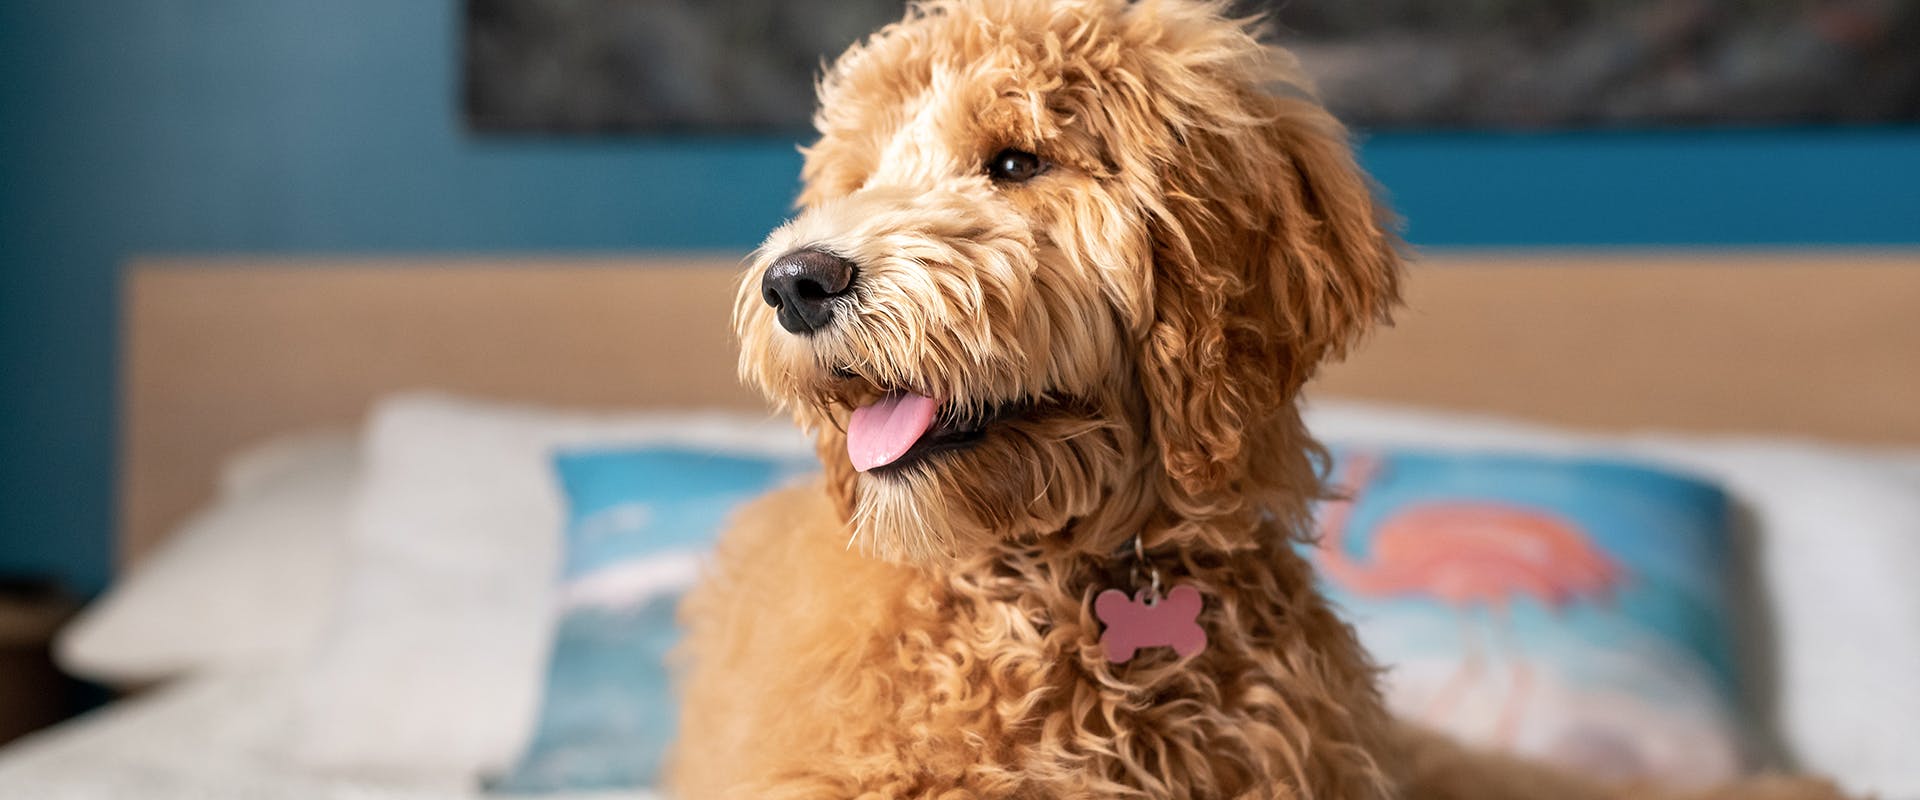 A Goldendoodle, mixed dog breed